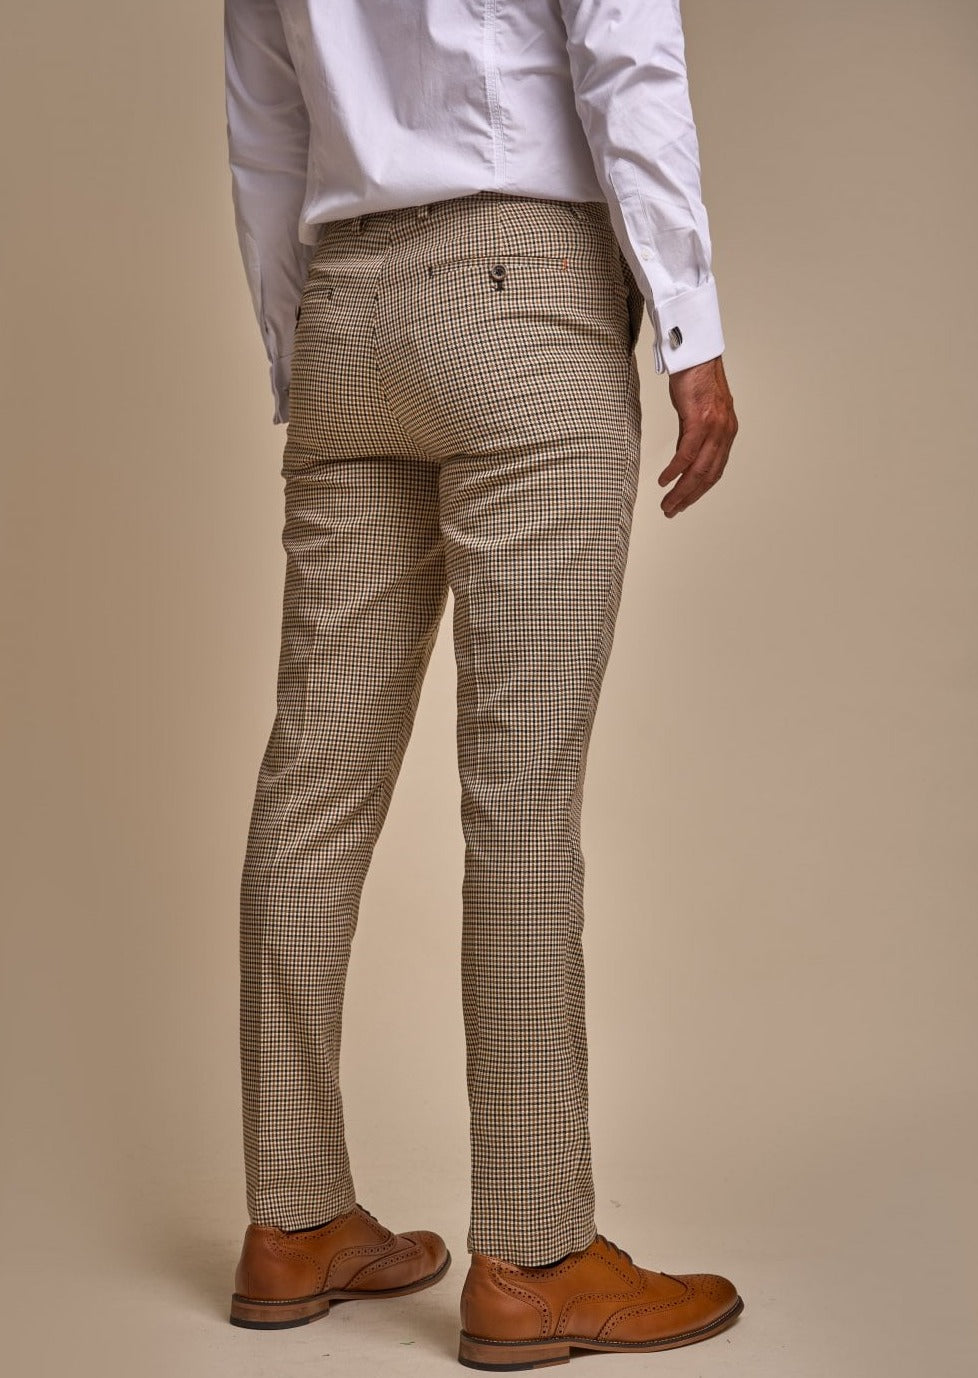 ELWOOD TAN HOUNDS-TOOTH 3-PIECE SUIT